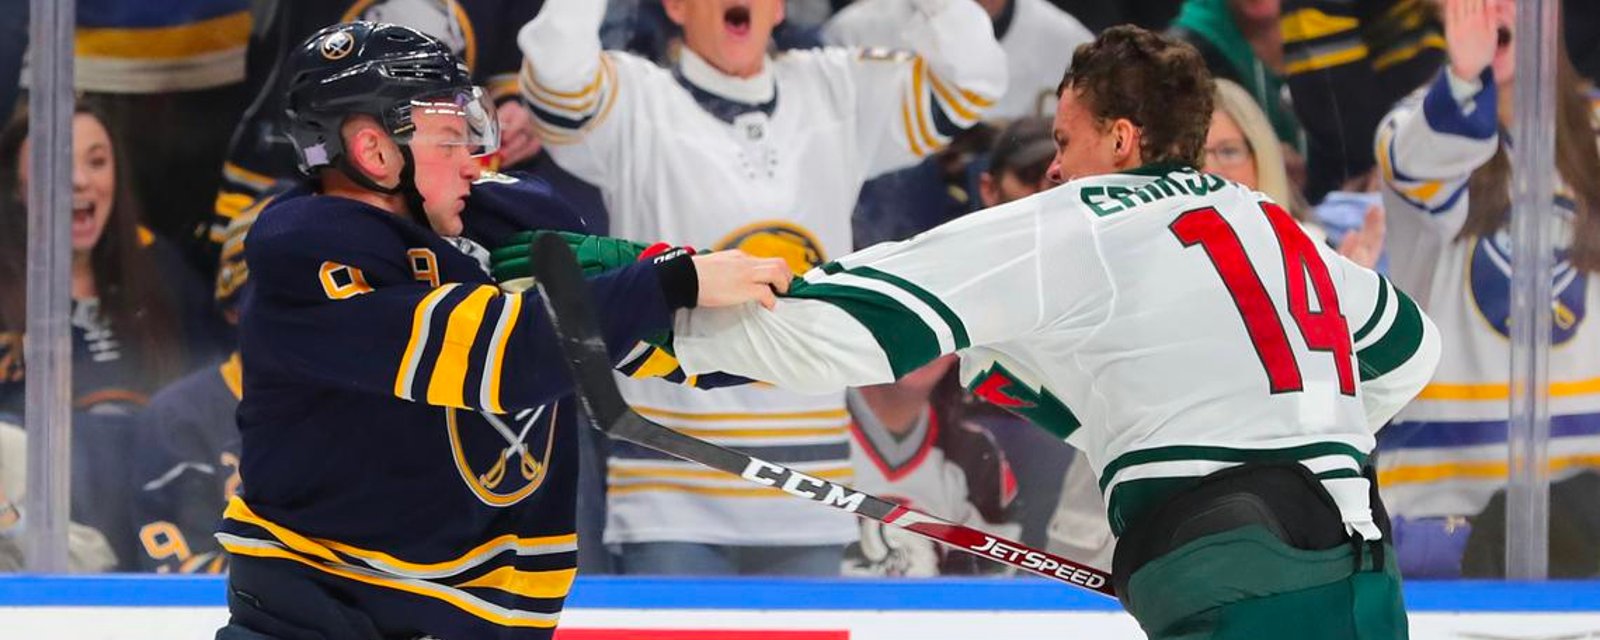 Wild ahead in Jack Eichel sweepstakes with trade discussions underway 